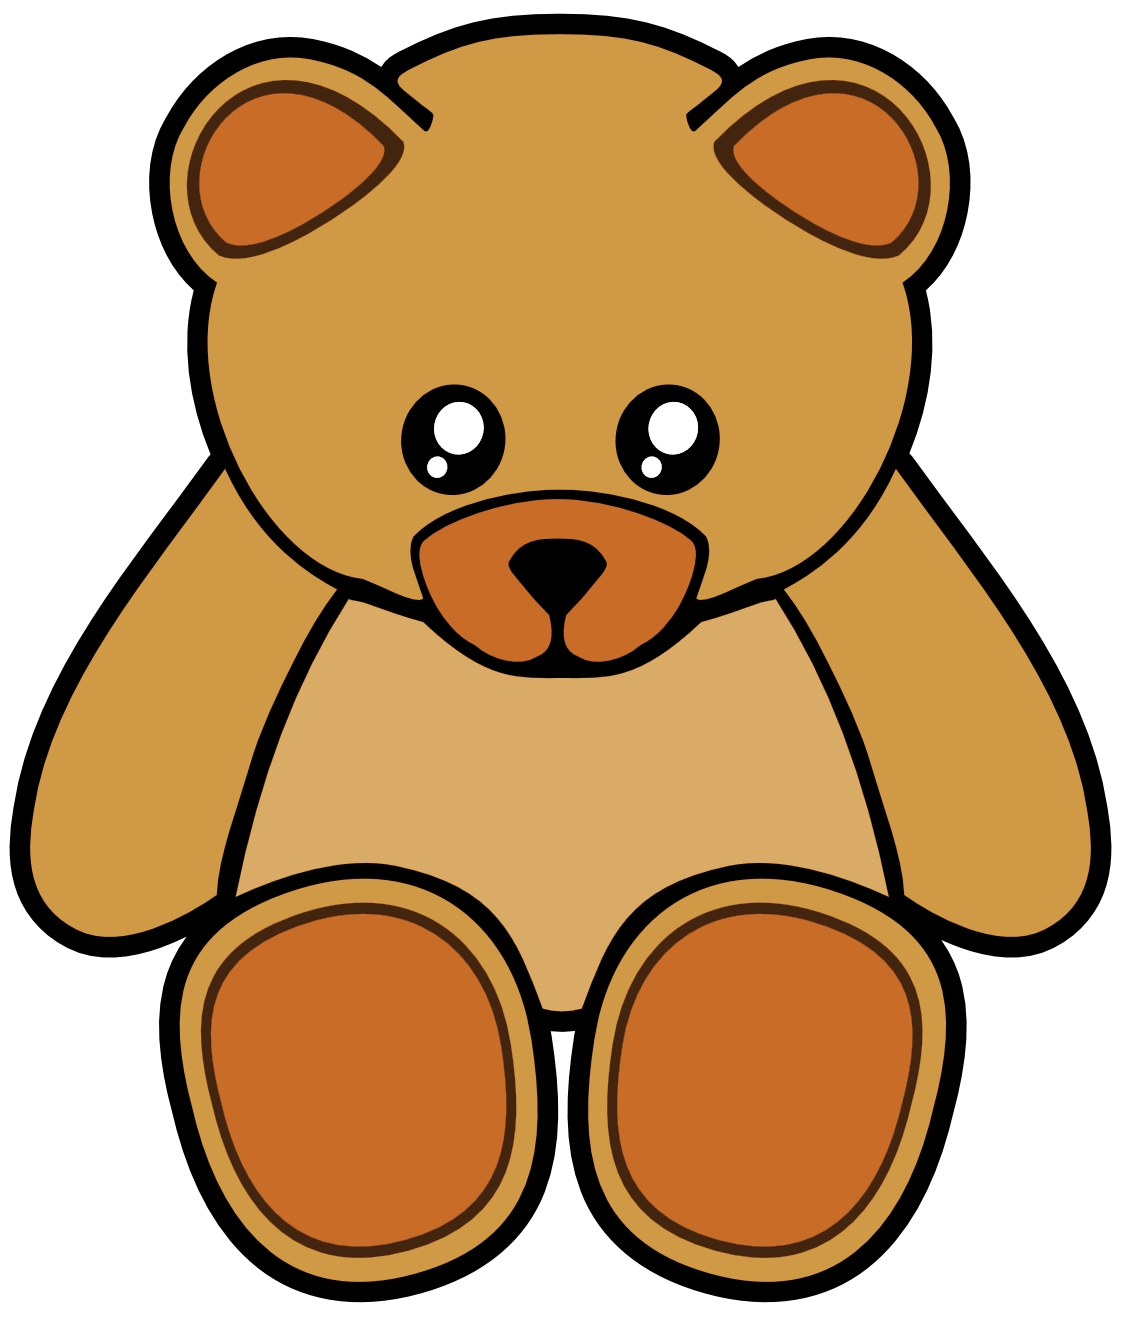 Teddy Bear Free Download Png Clipart